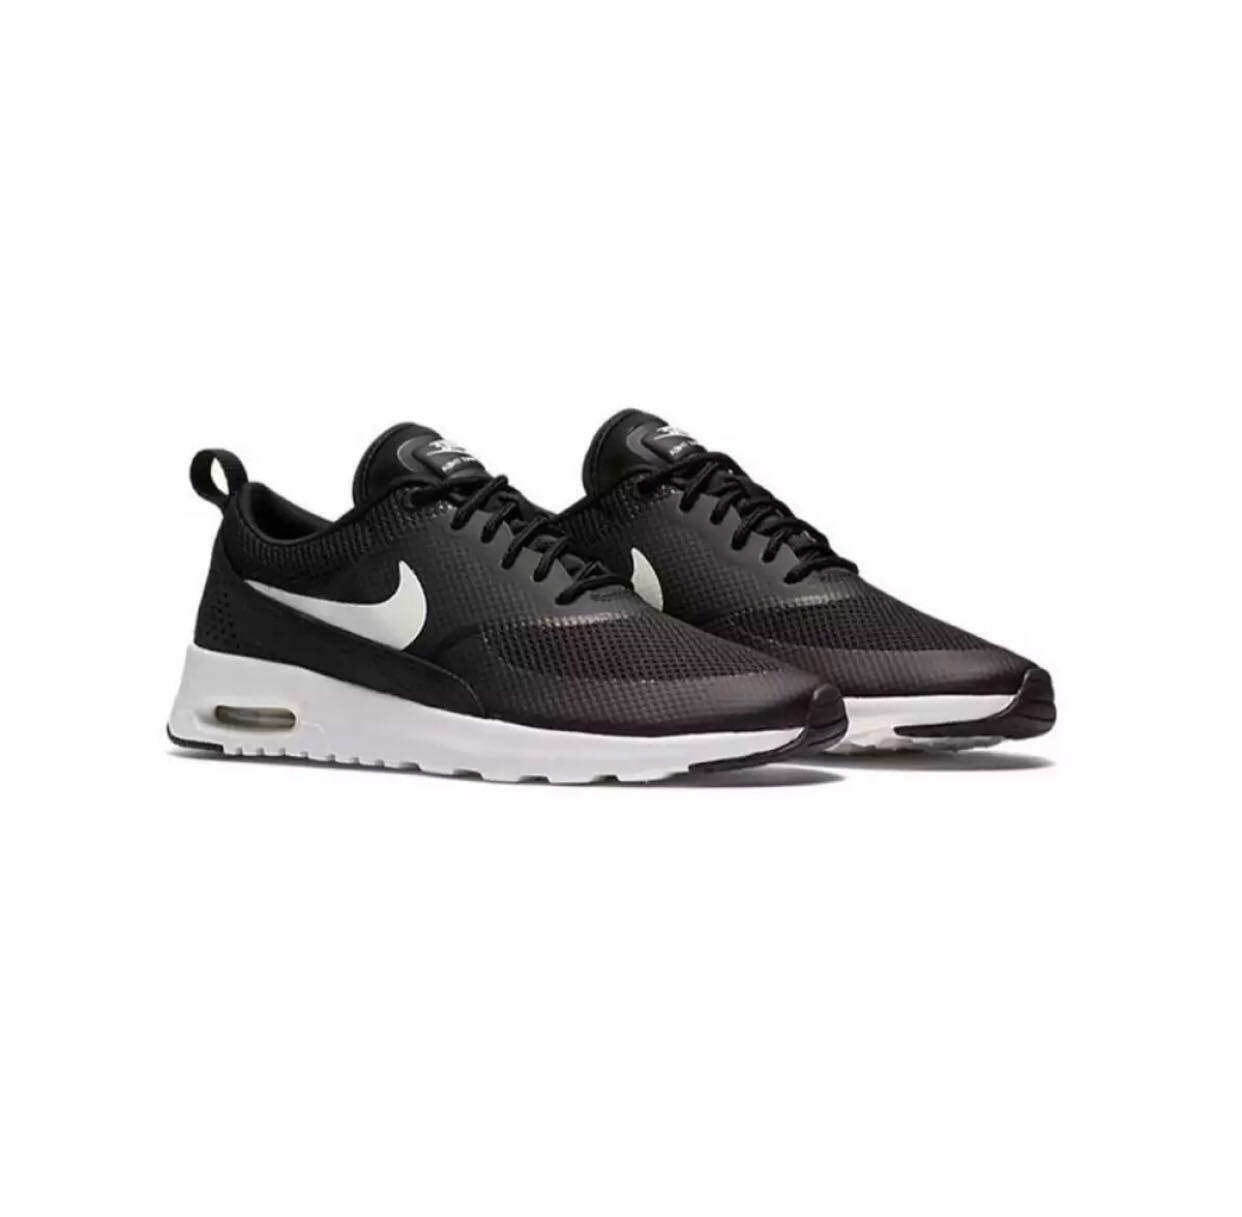 Authentic Nike Air Max Thea, Women's 